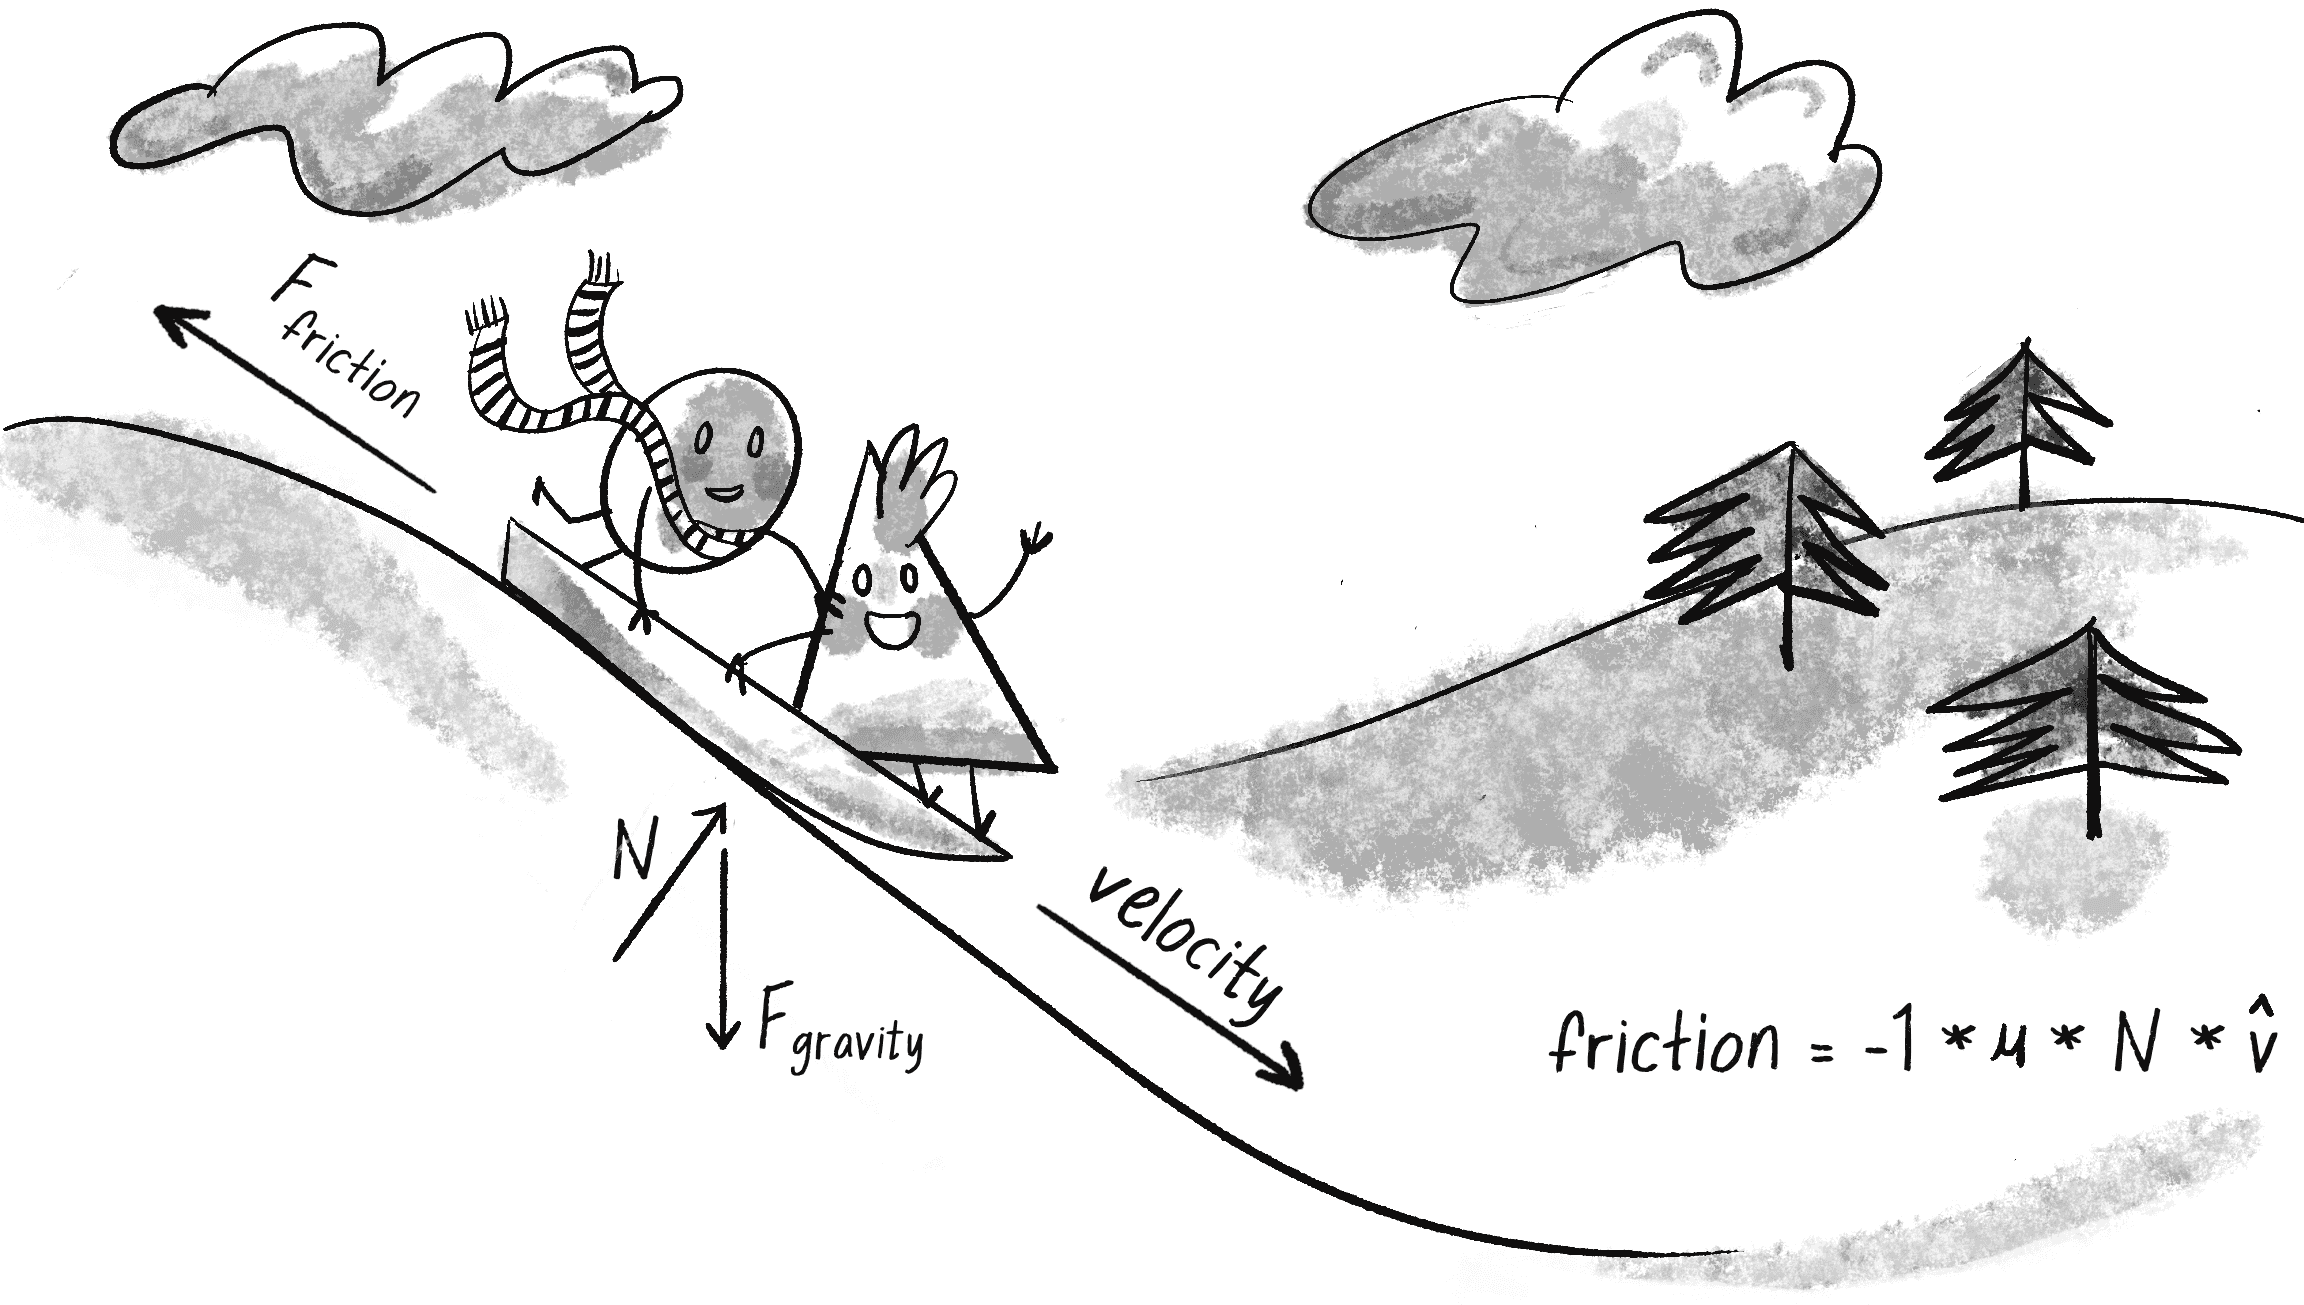 Figure 2.3: Friction is a force that points in the opposite direction of the sled’s velocity when sliding in contact with the hill.